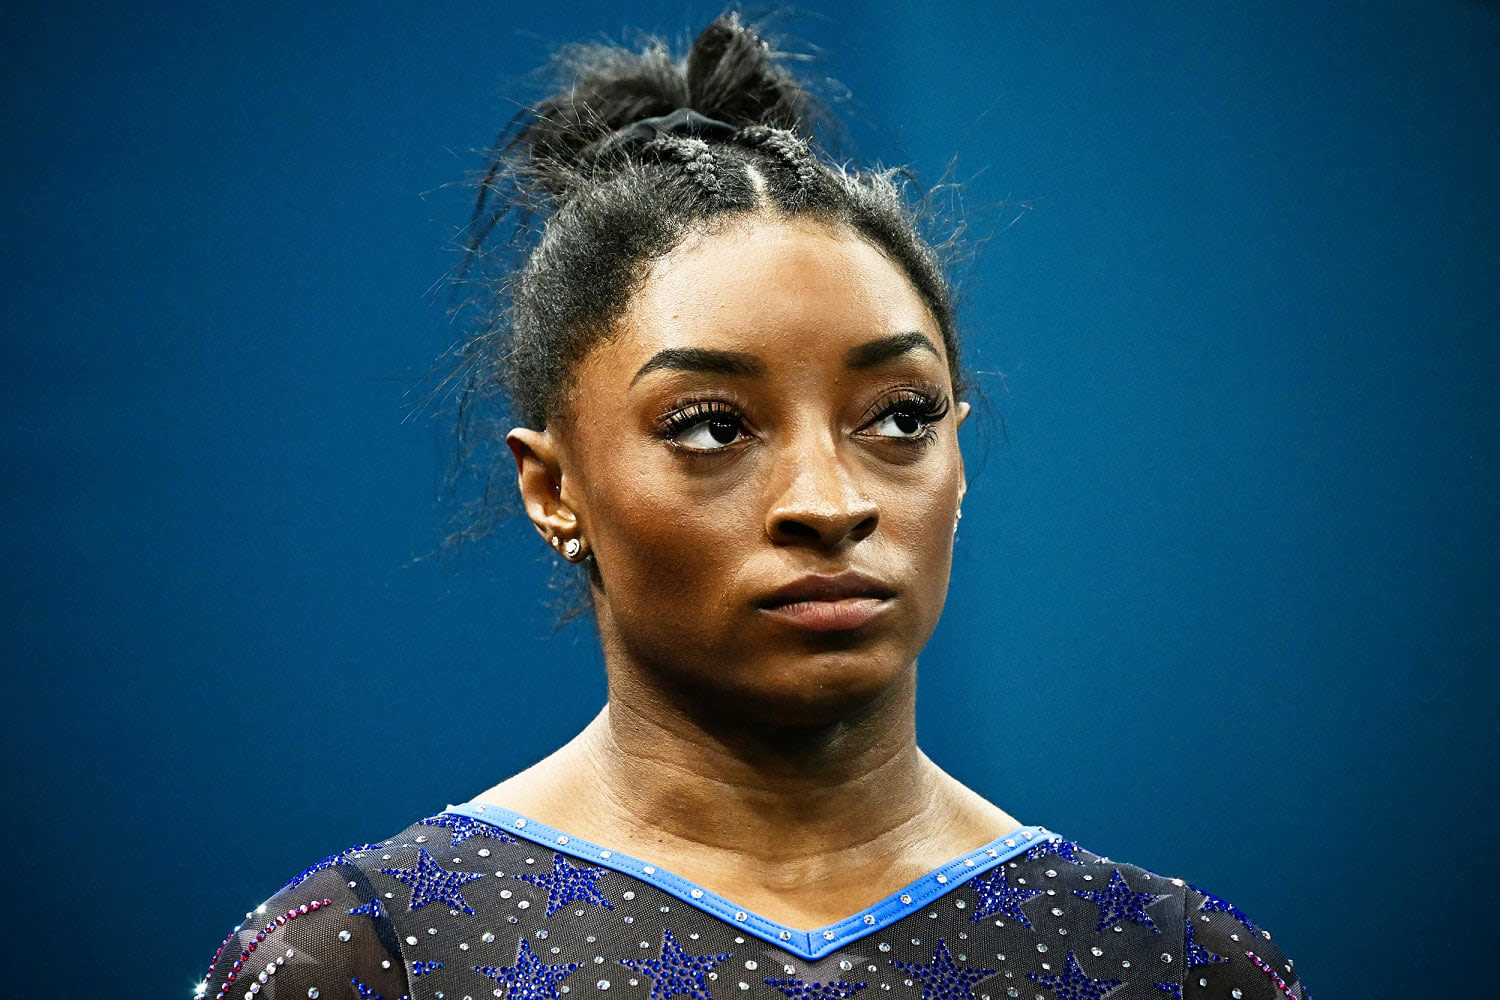 Why Simone Biles wrote that she loves her 'Black job' after historic Olympics win